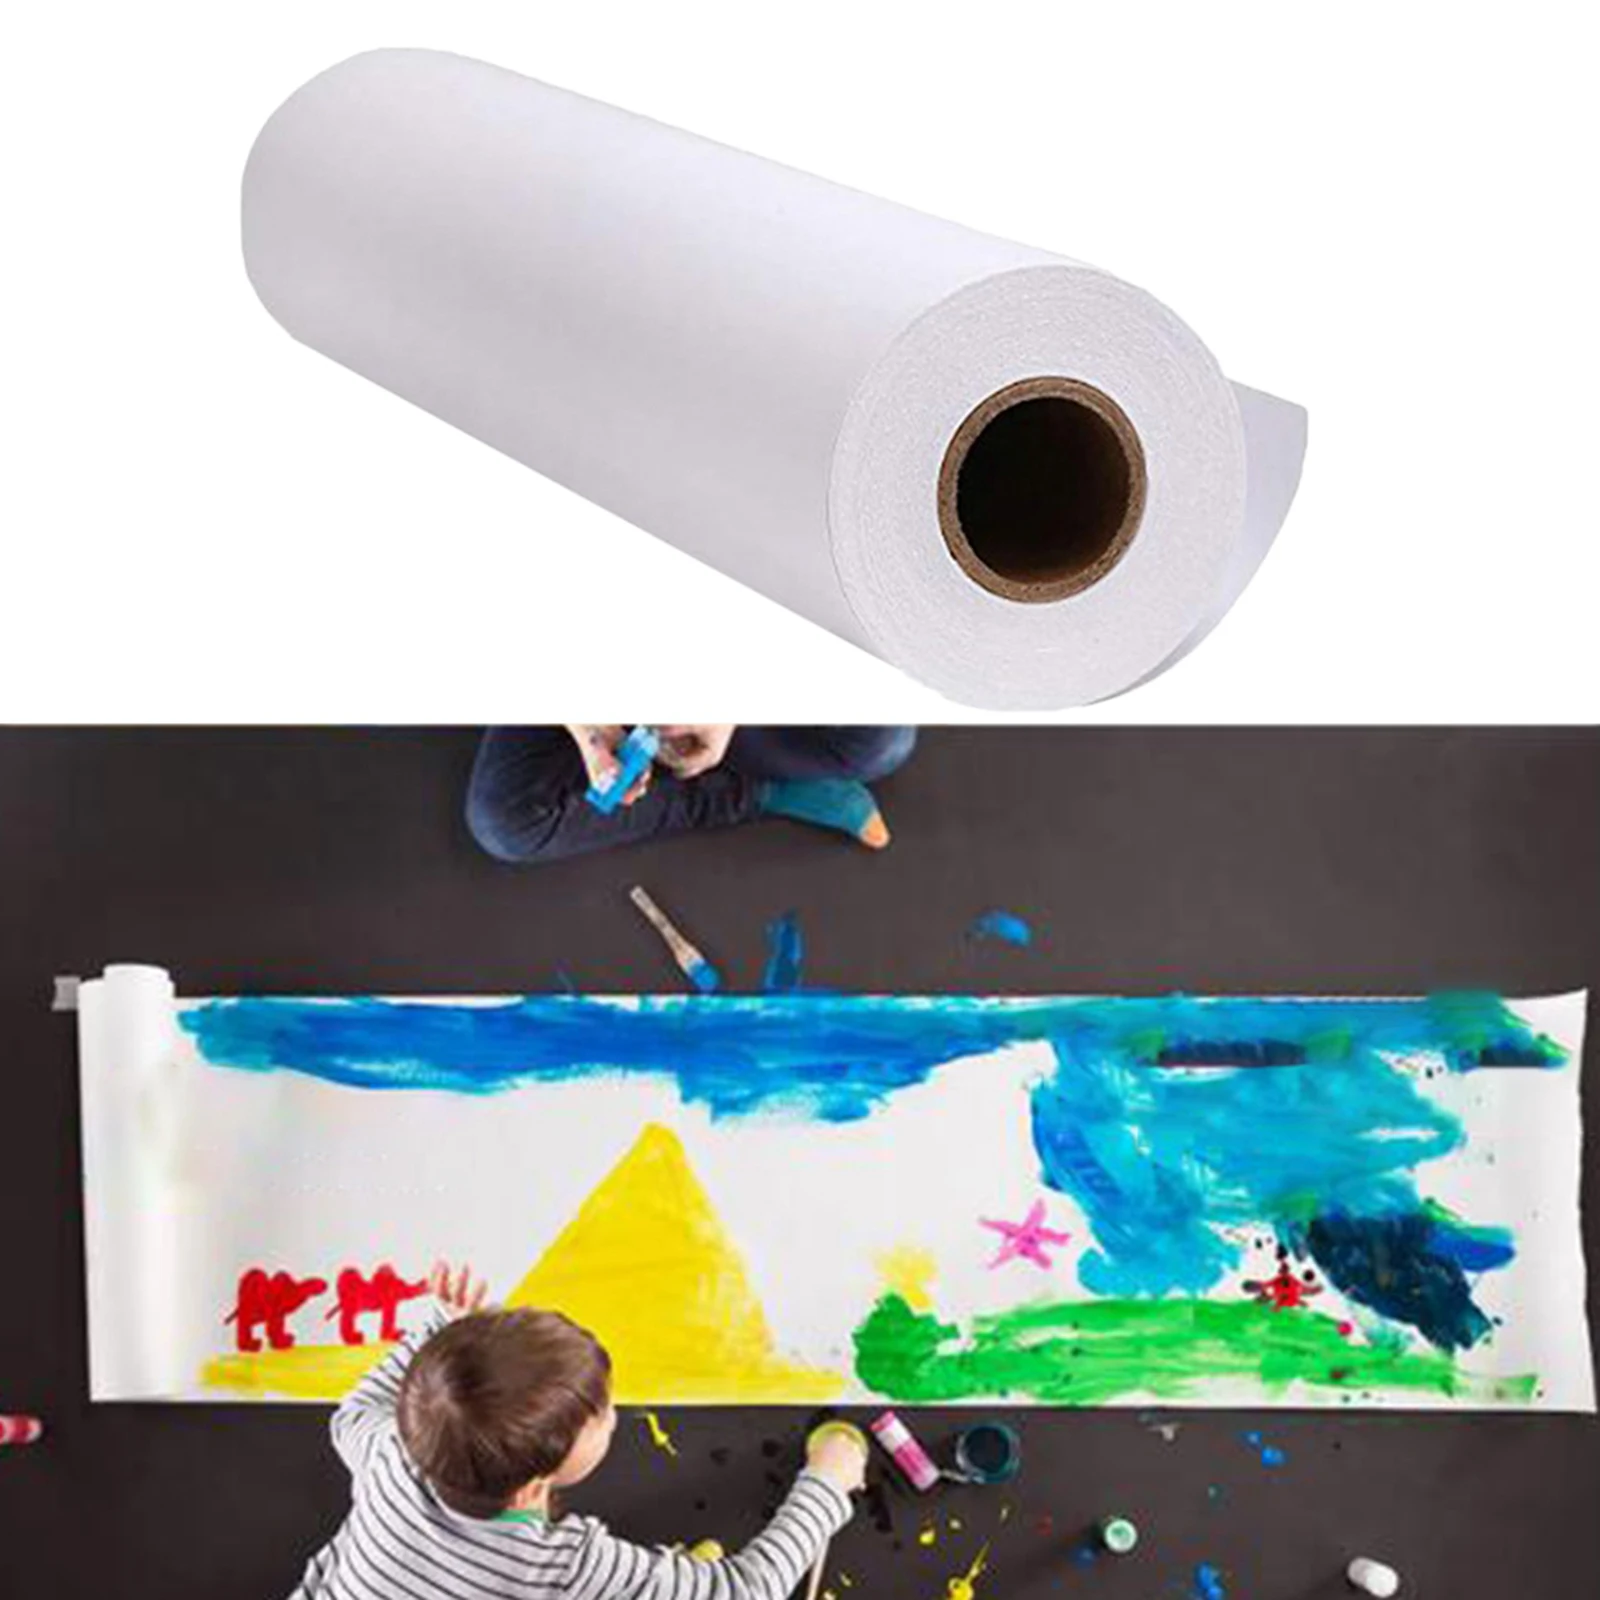 2x Tabletop Paper Roll Dispenser Artist Easel Paper for Oil Painting Watercolor